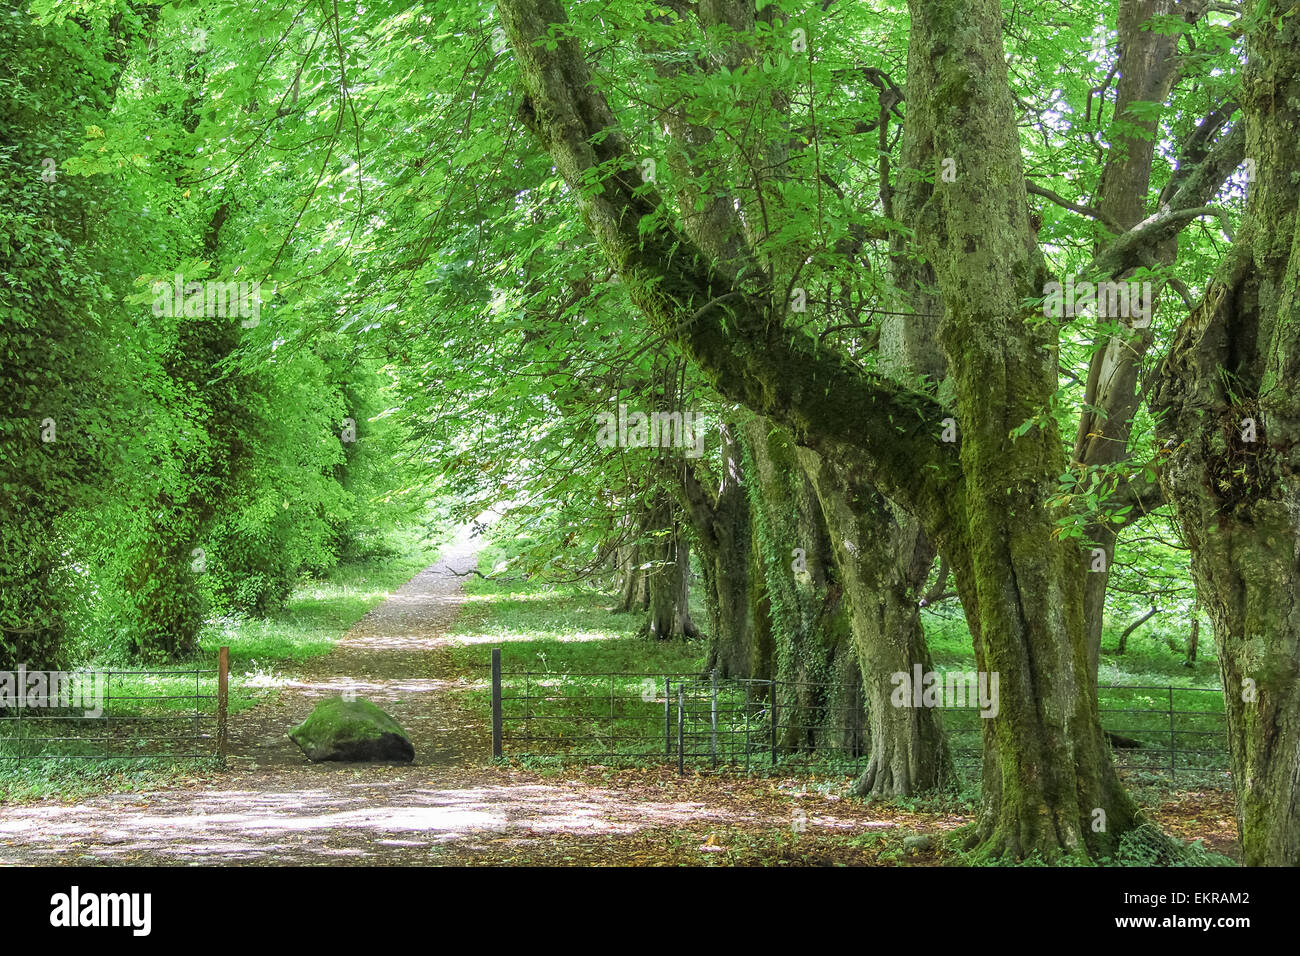 Green avenue with old trees at Muckross Abbey, County Kerry, Ireland Stock Photo